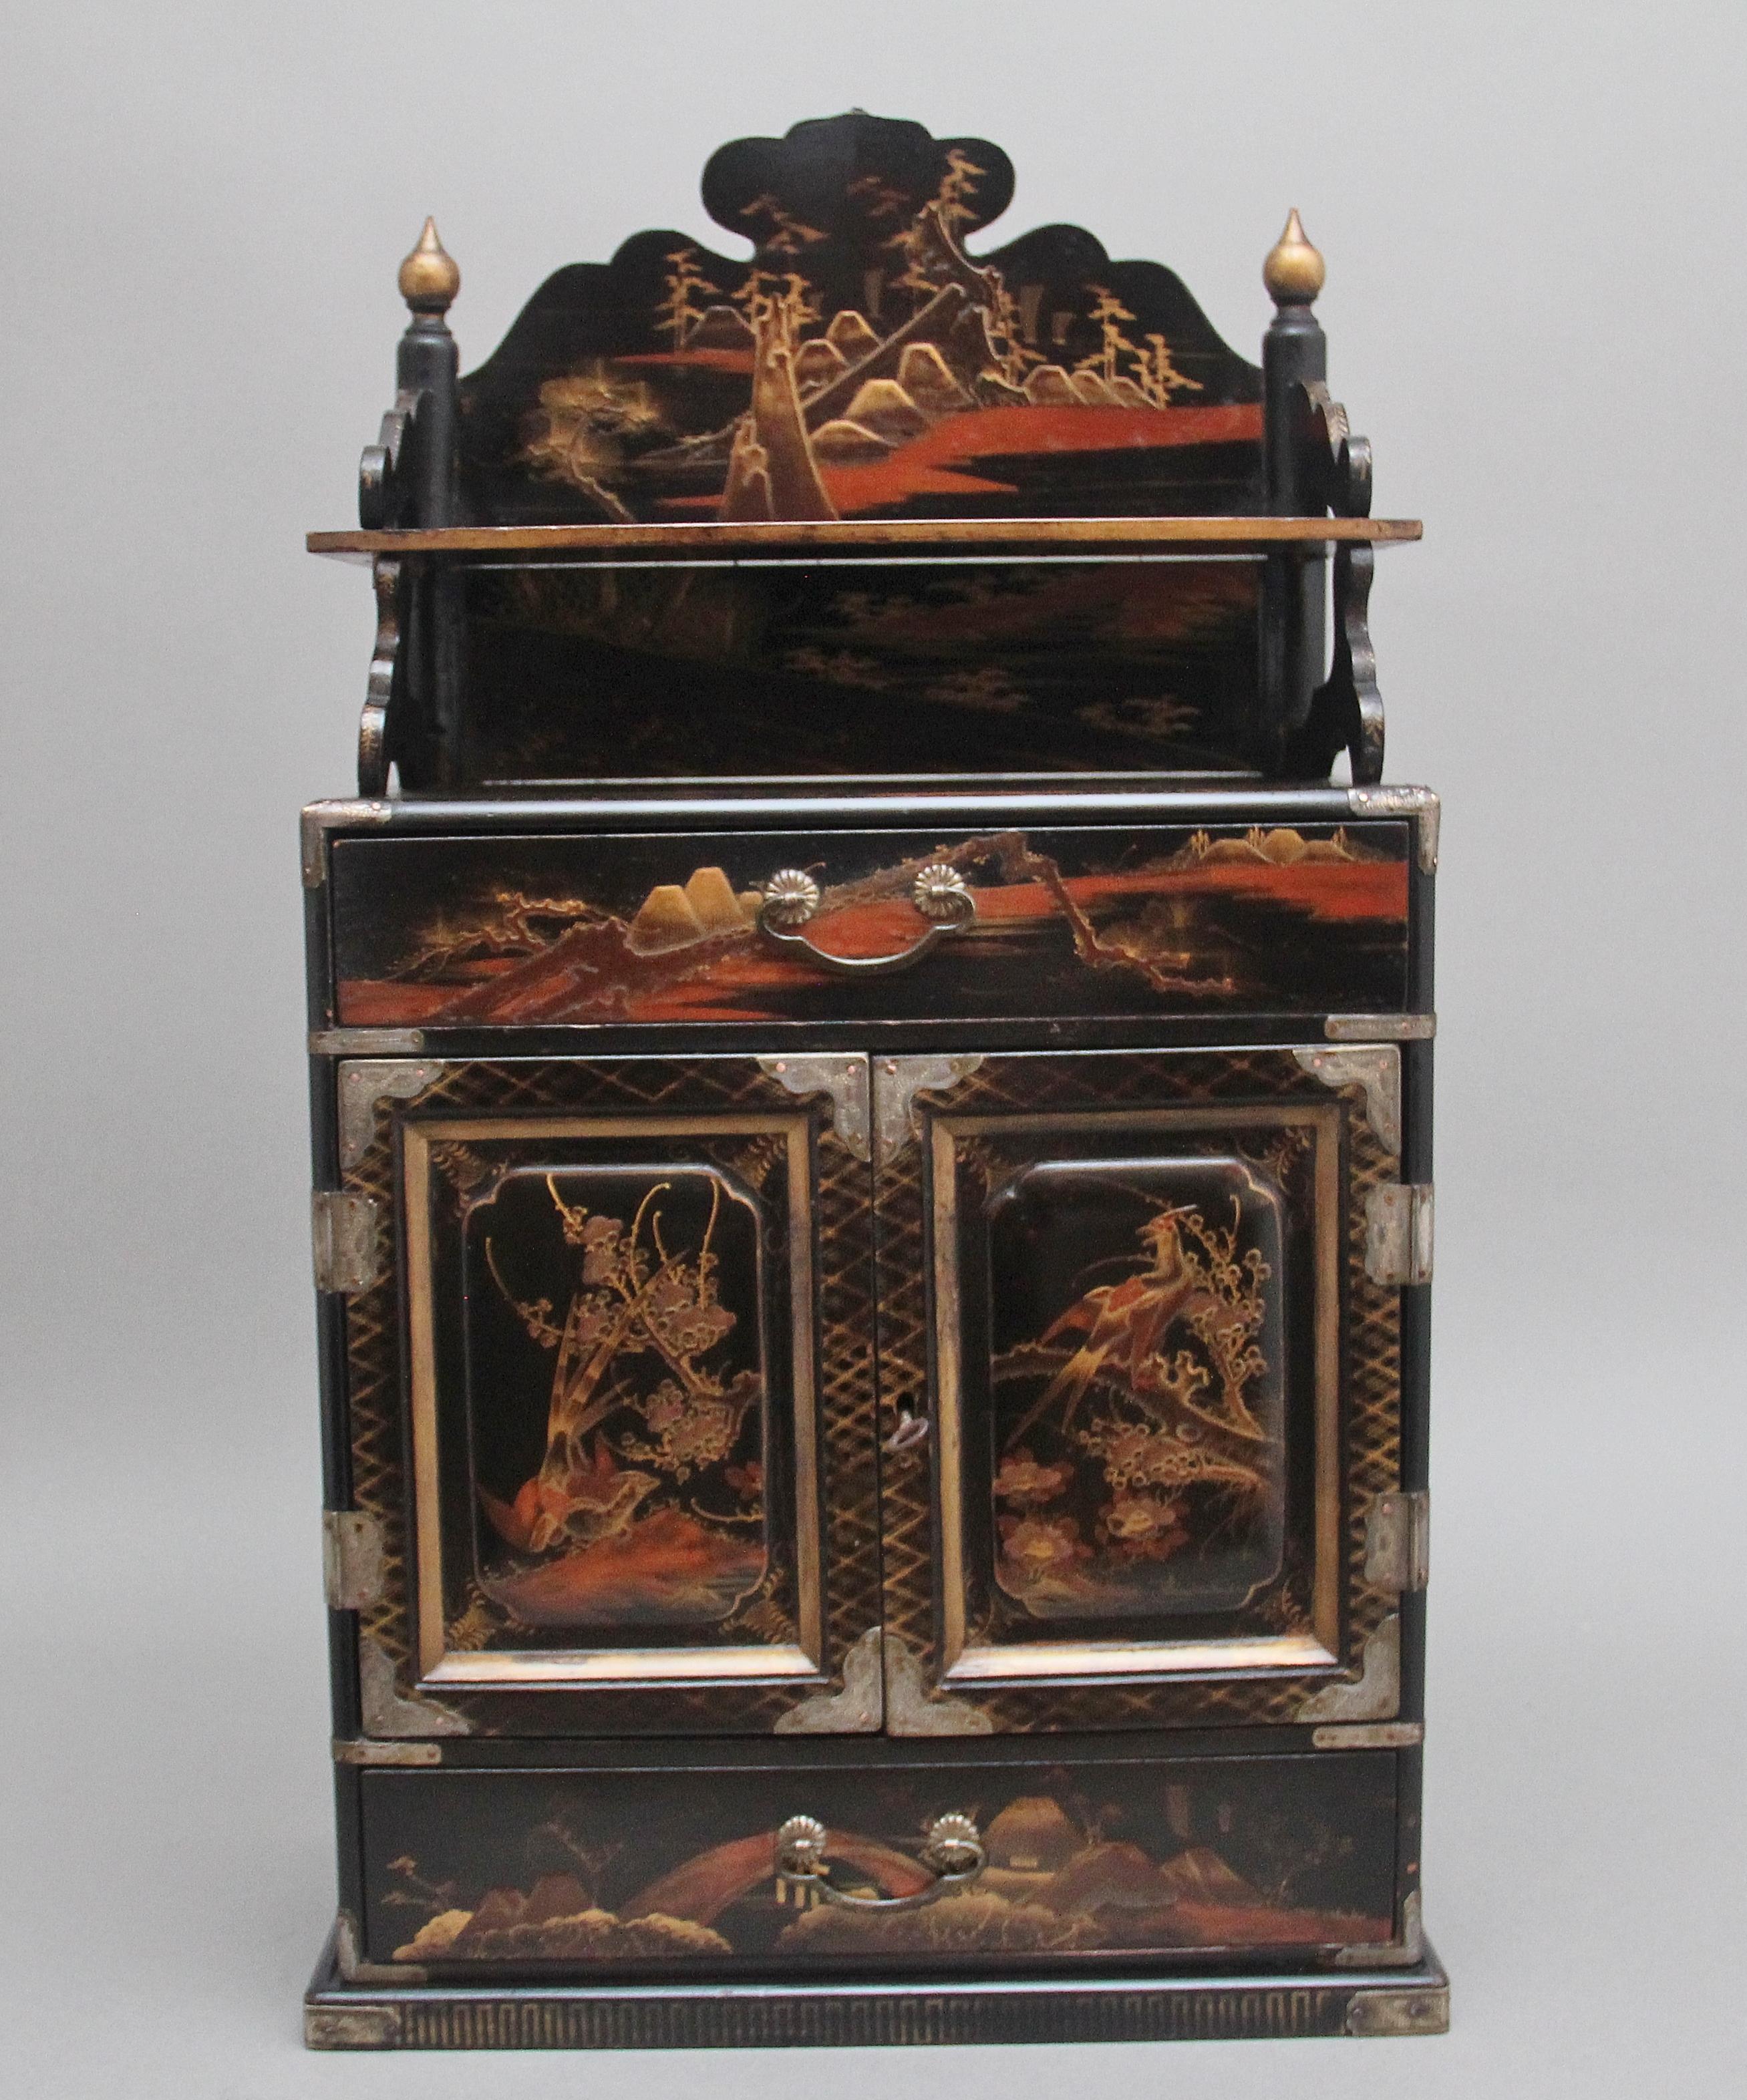 19th Century freestanding Japanese black lacquered and painted table top cabinet from the Meiji period (1868-1912) The cabinet throughout depicting Japanese countryside scenes, various foliage and birds, the top structure having a decorative shaped